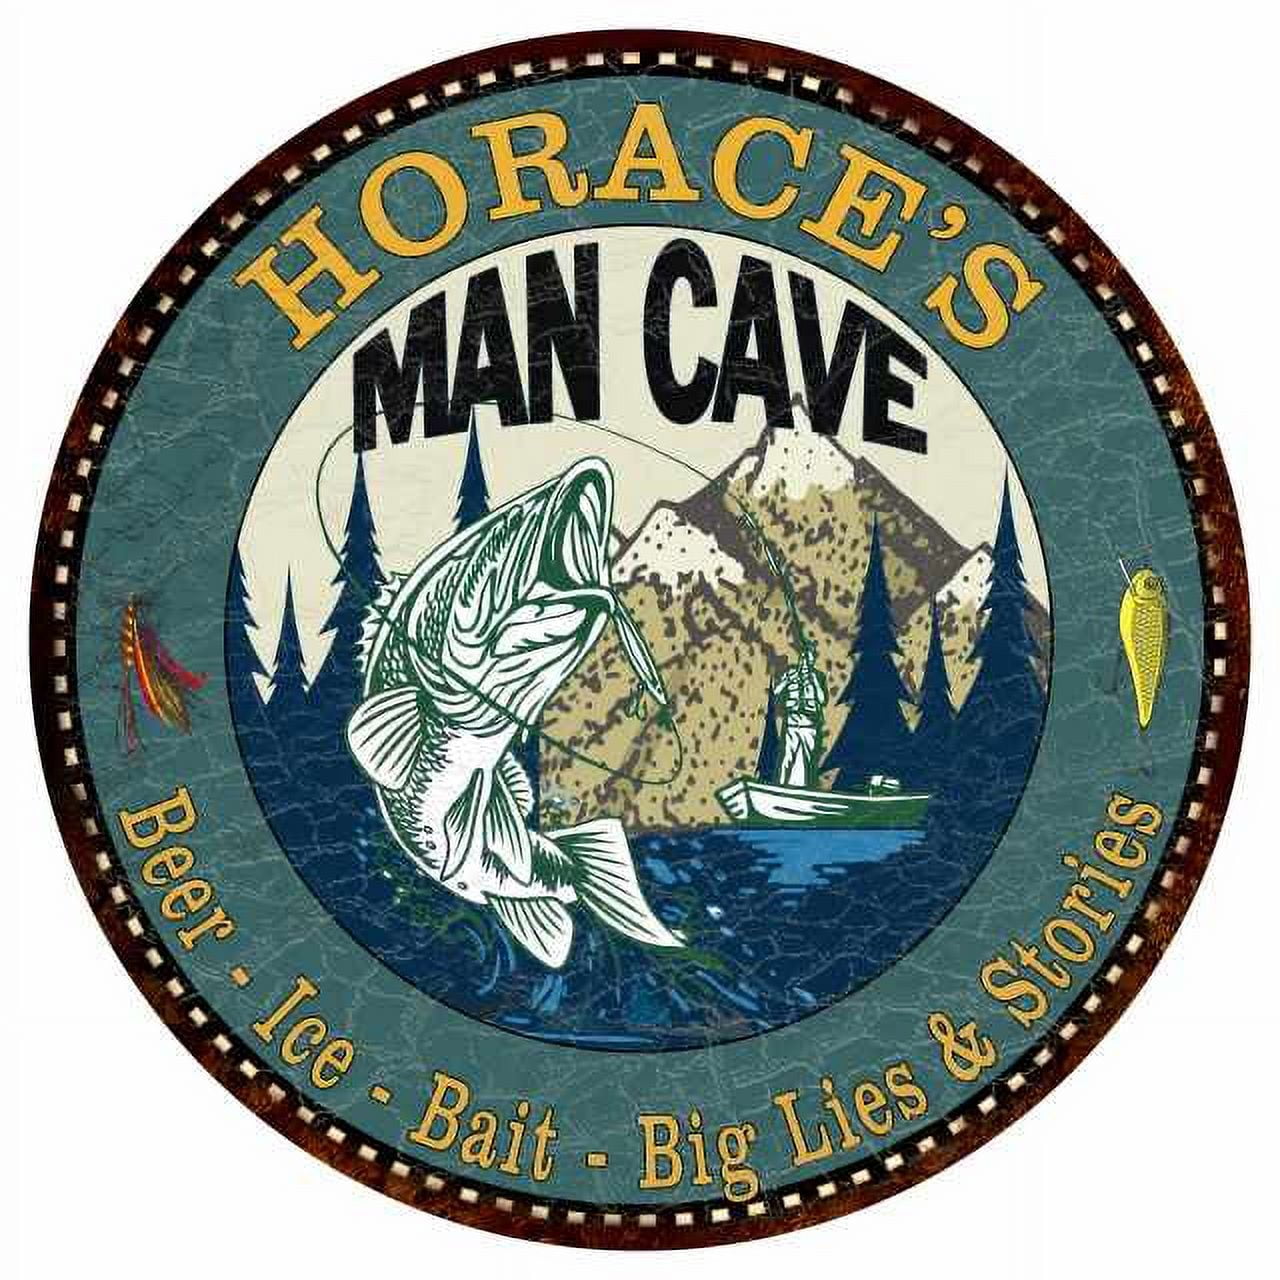 HORACE'S Man Cave Fishing 12 Round Metal Sign Garage Bar Décor